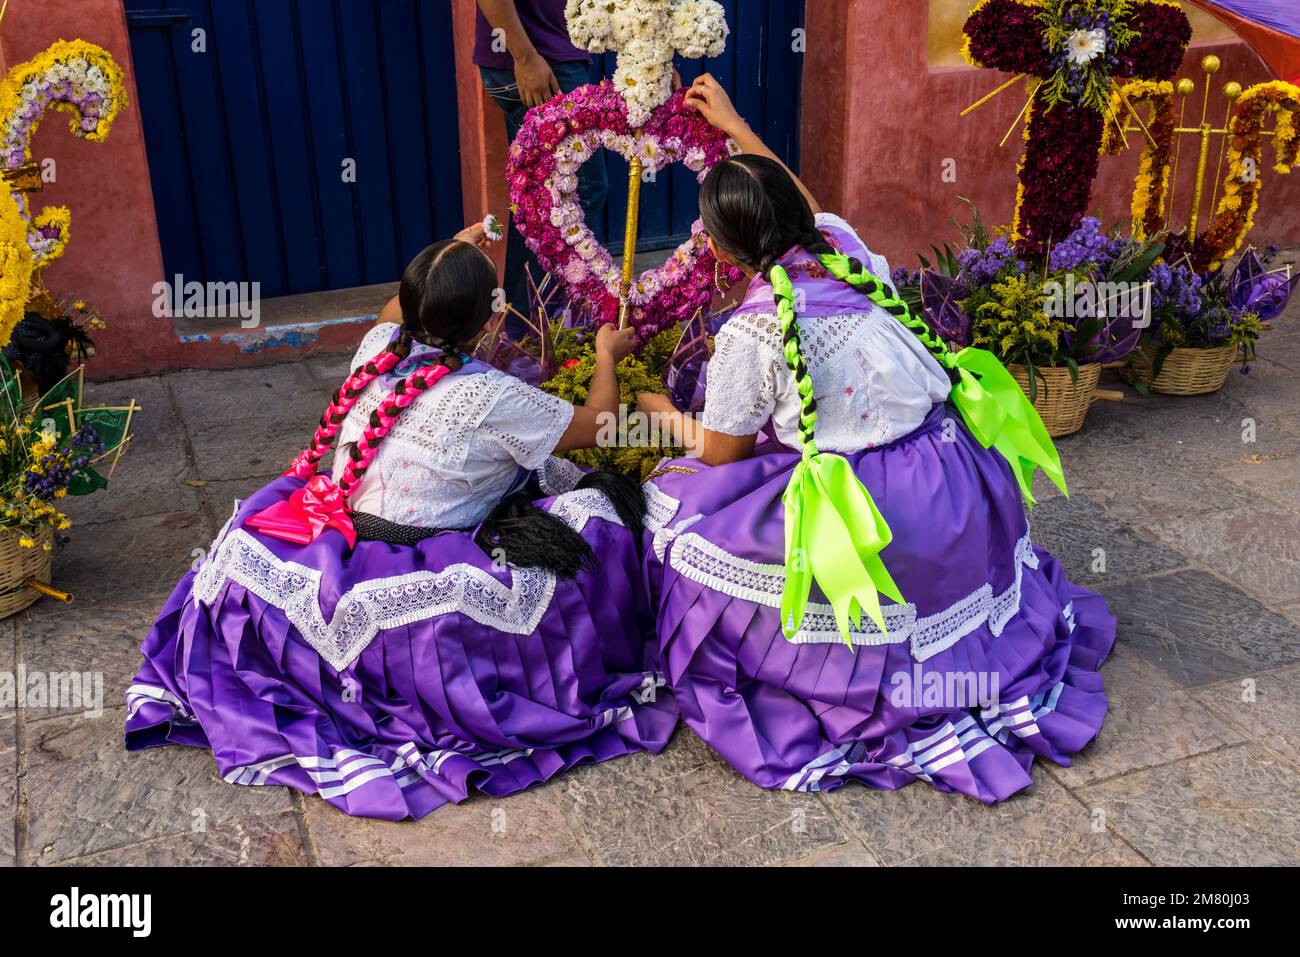 Chinas Oaxaquenas dancers decorate flower baskets to carry on their heads at the Guelaguetza festival in Oaxaca, Mexico. Stock Photo